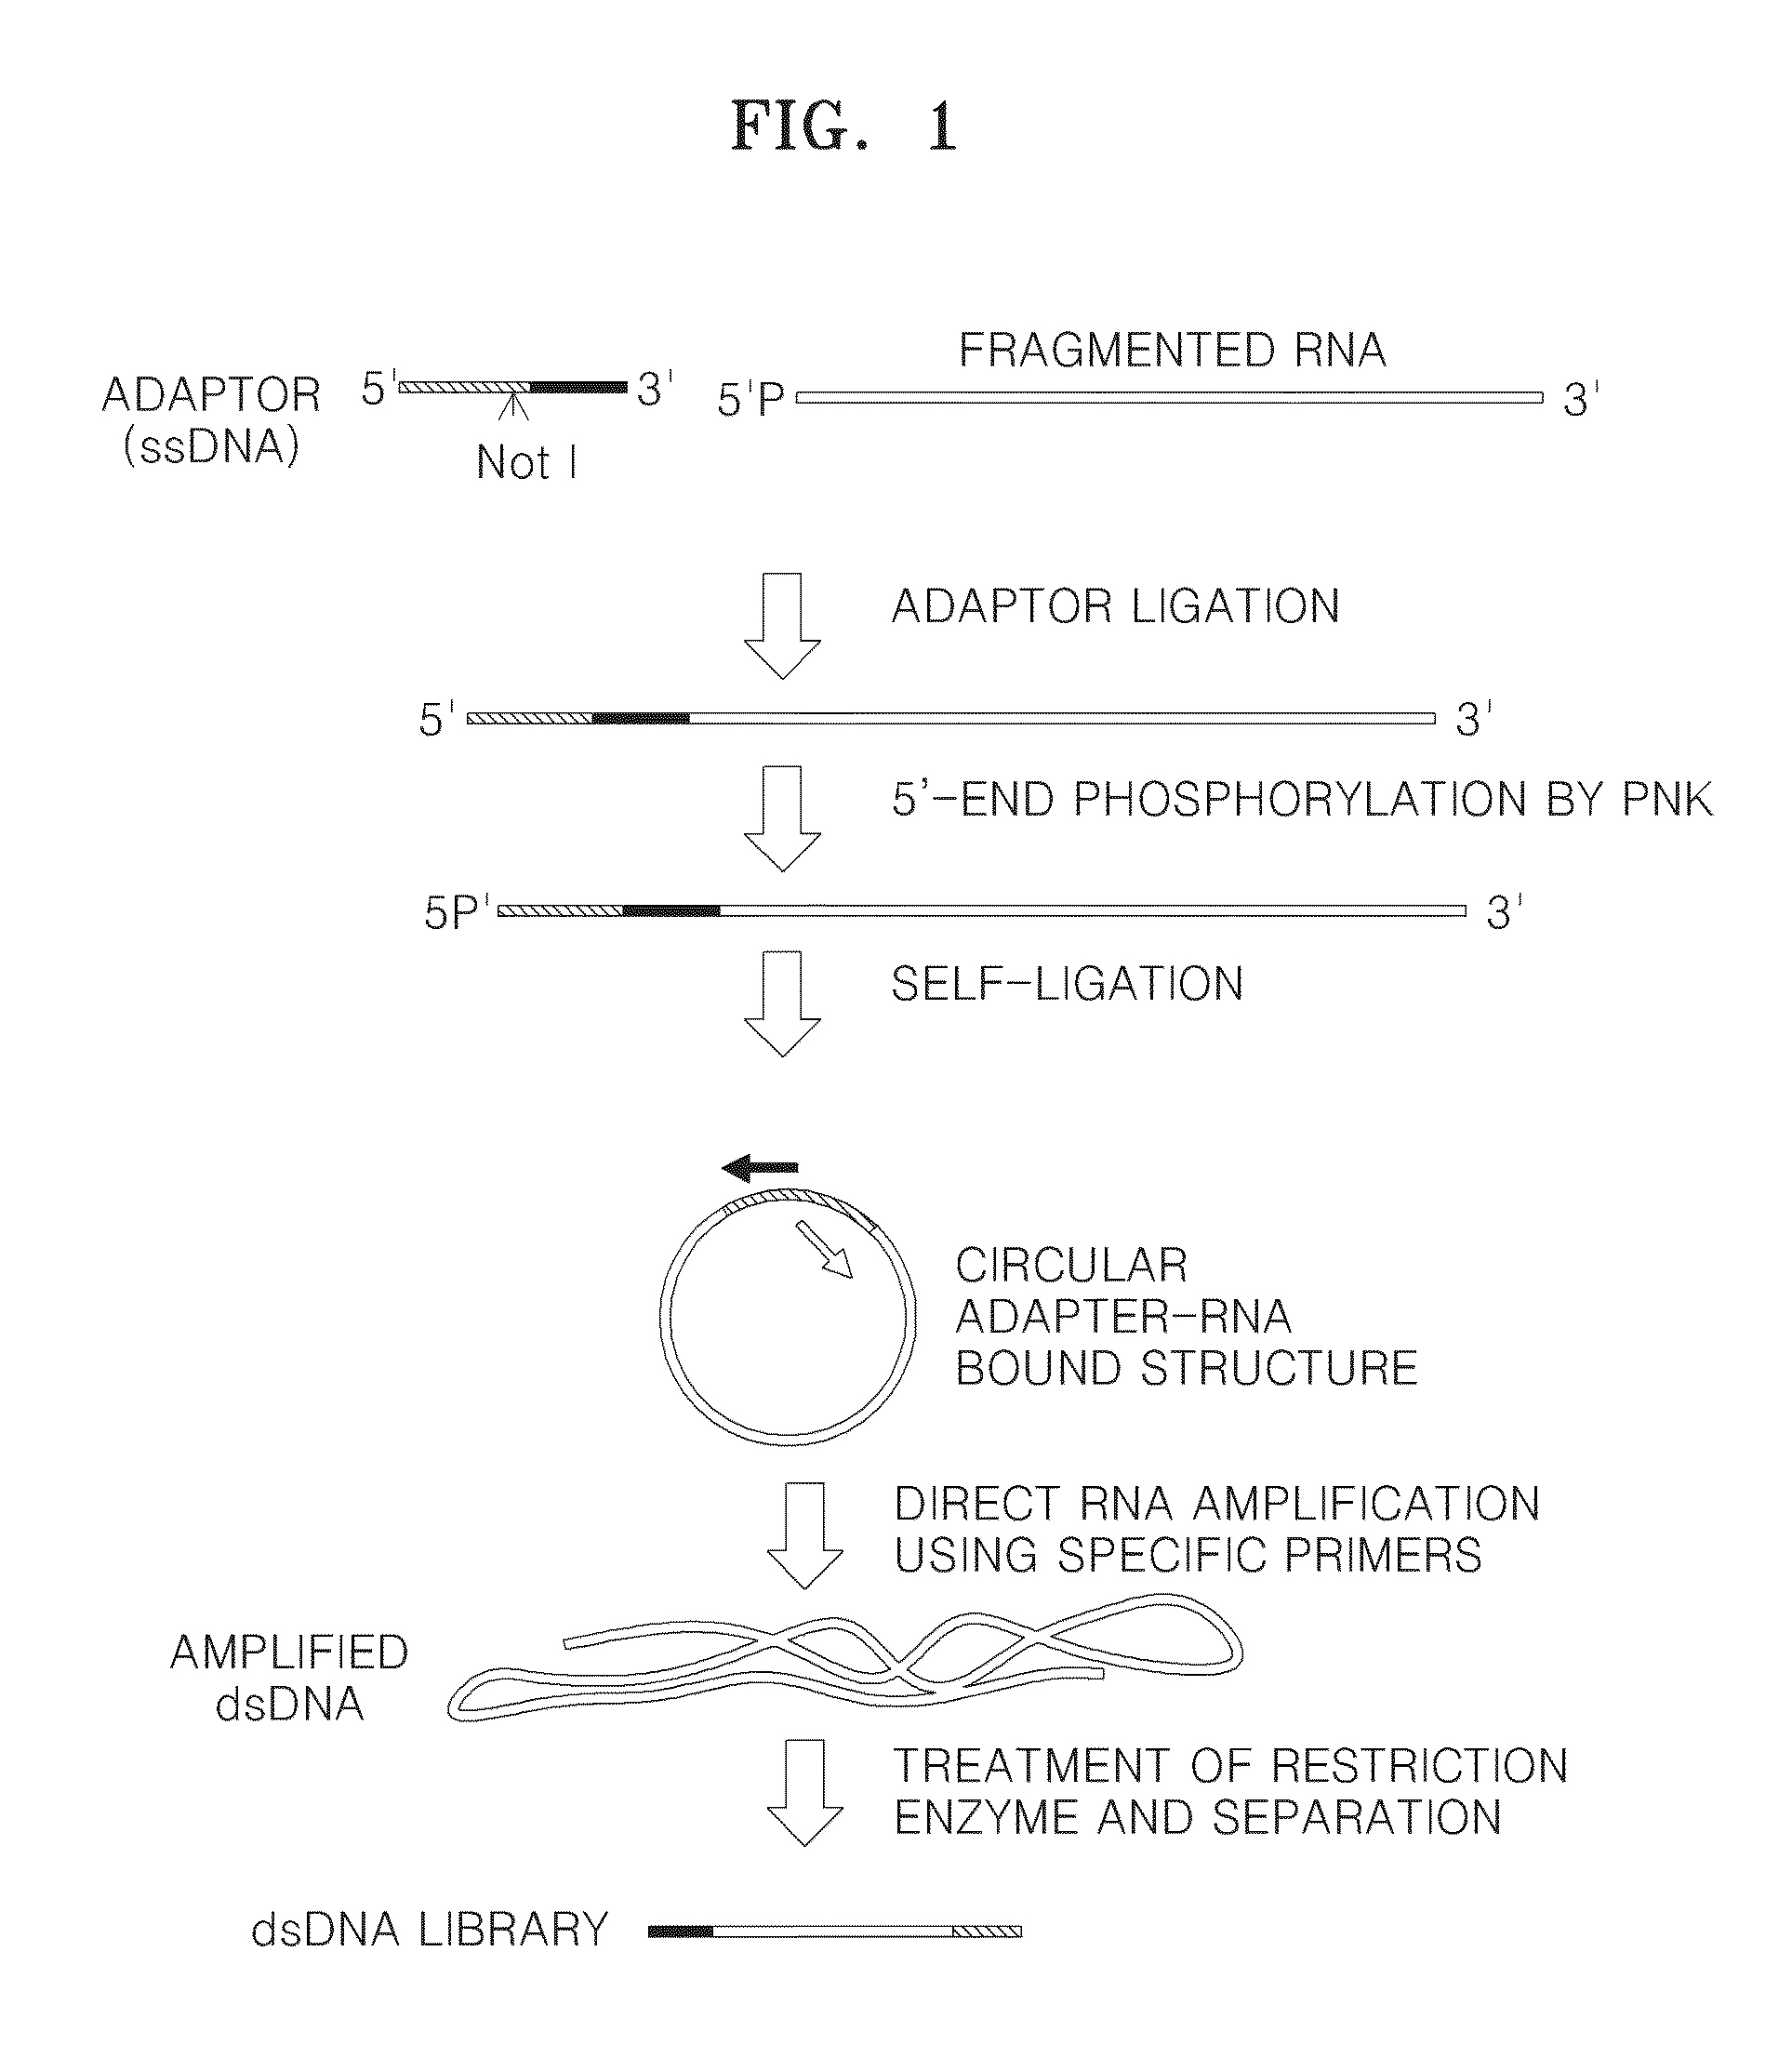 Method of amplifying DNA from RNA in a sample